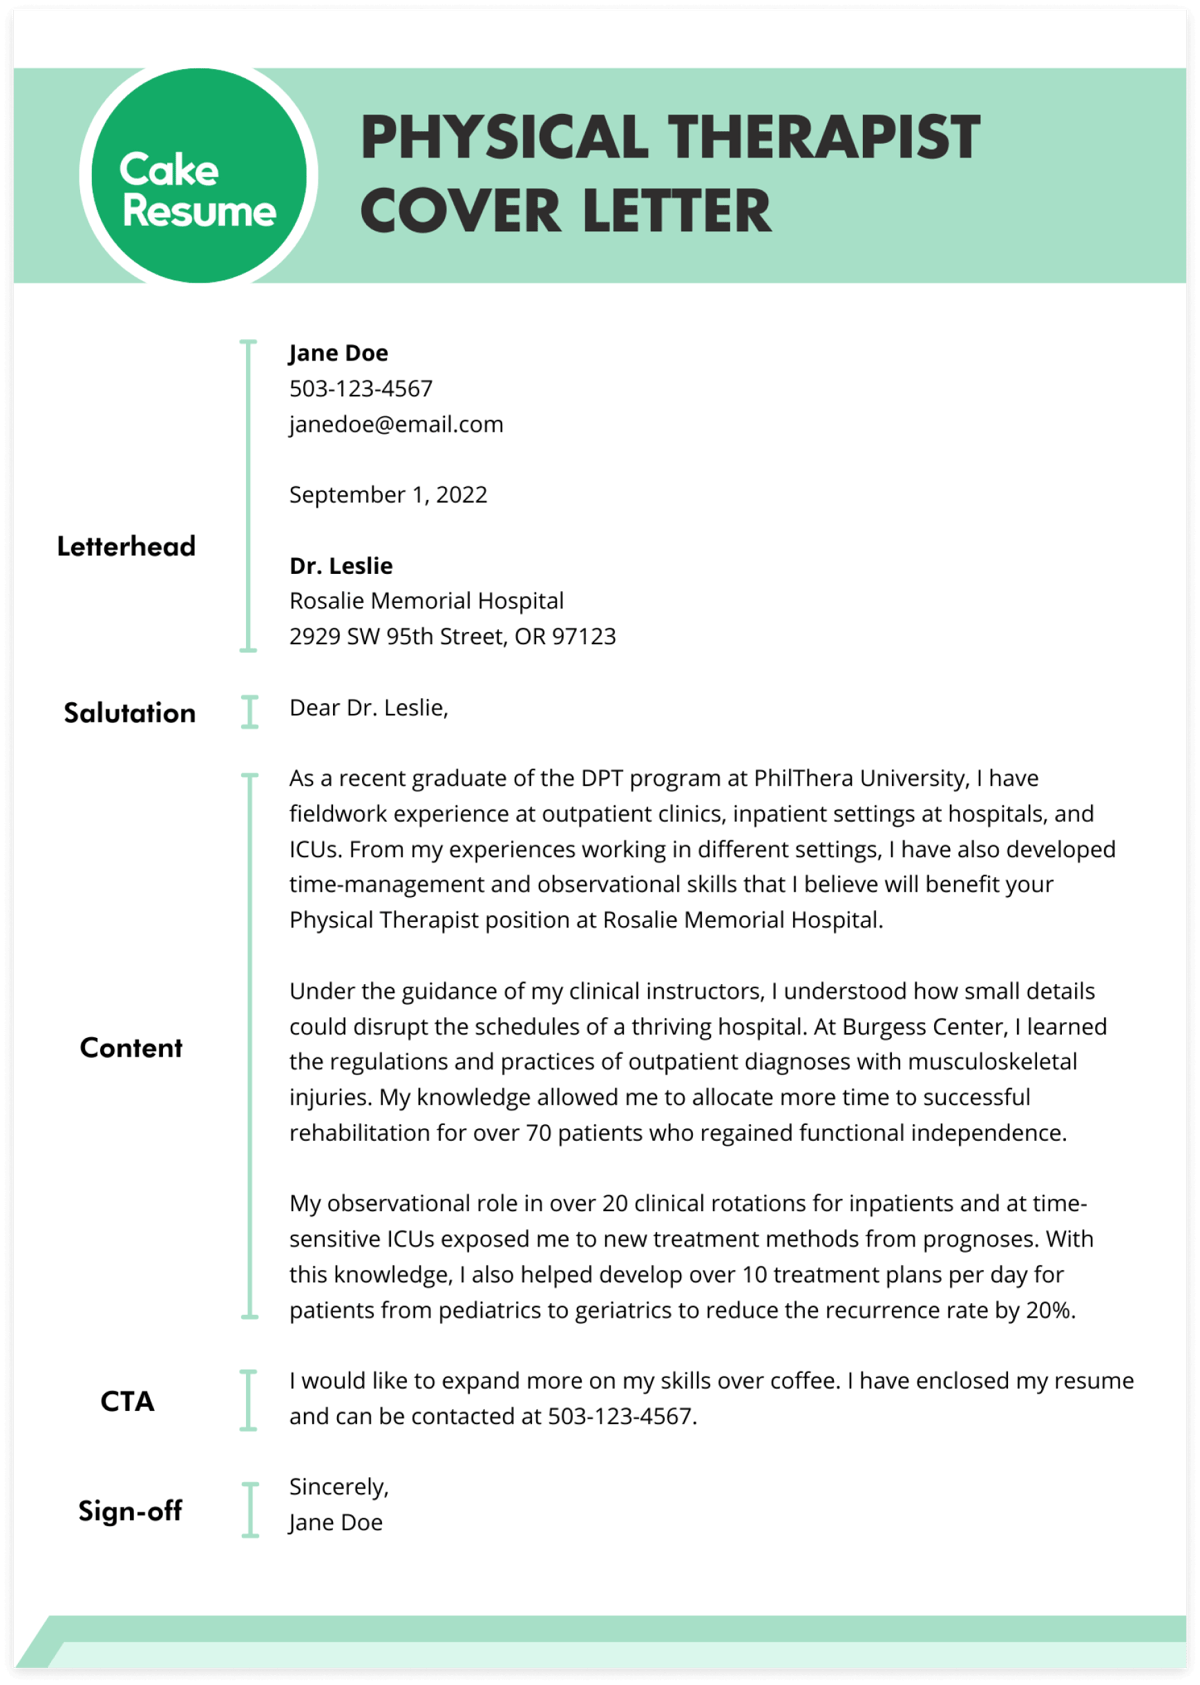 Physical Therapist Cover Letter Sample